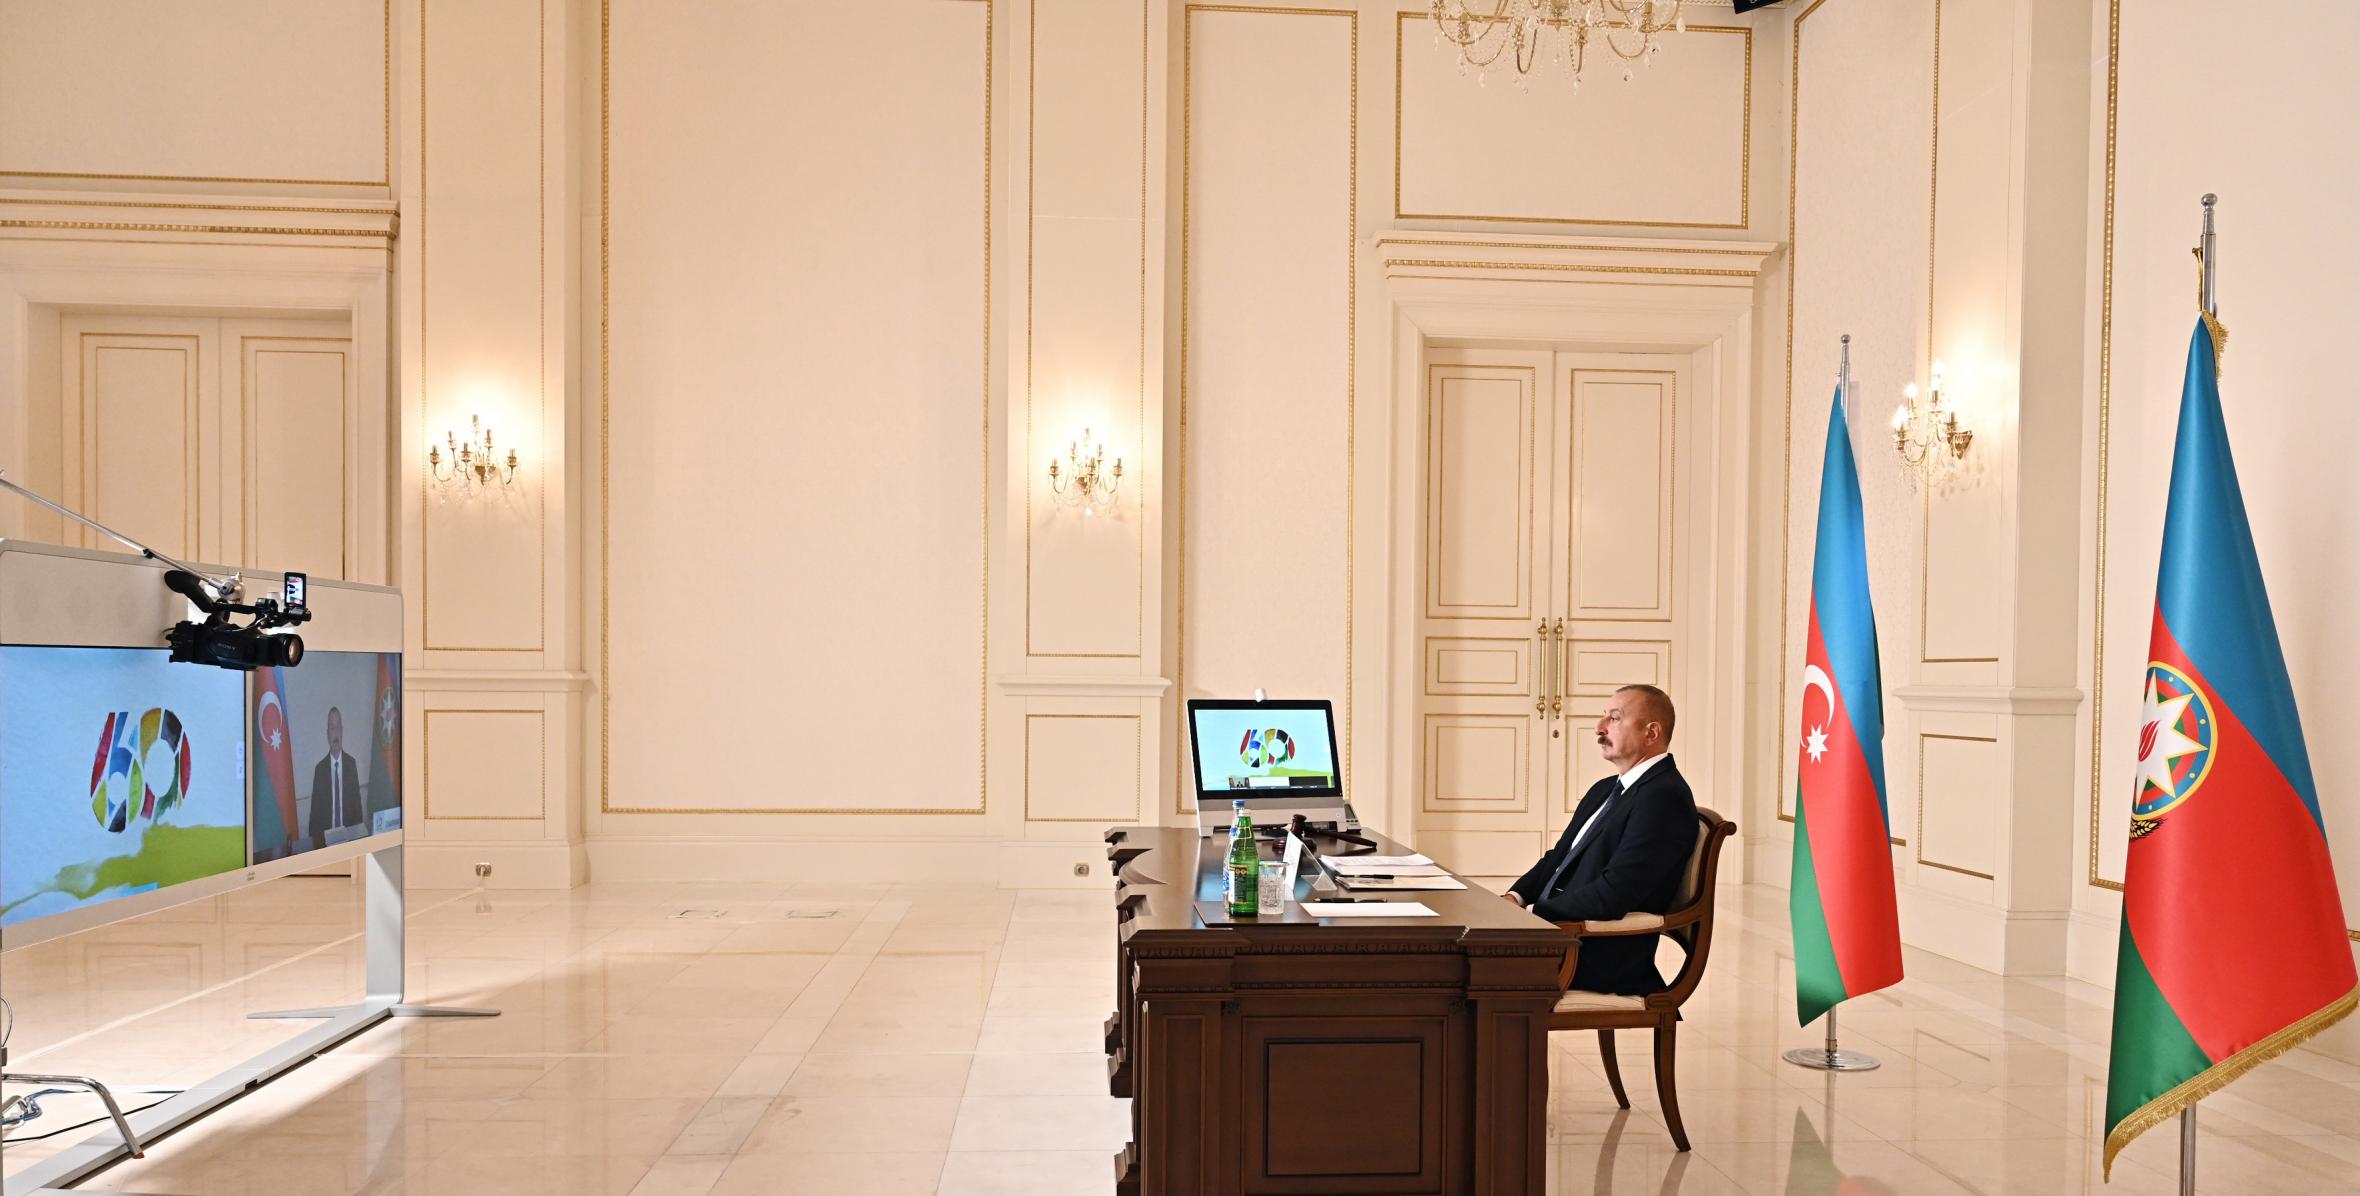 Ilham Aliyev made speech at High-Level Commemorative Meeting of the Non-Aligned Movement in video format